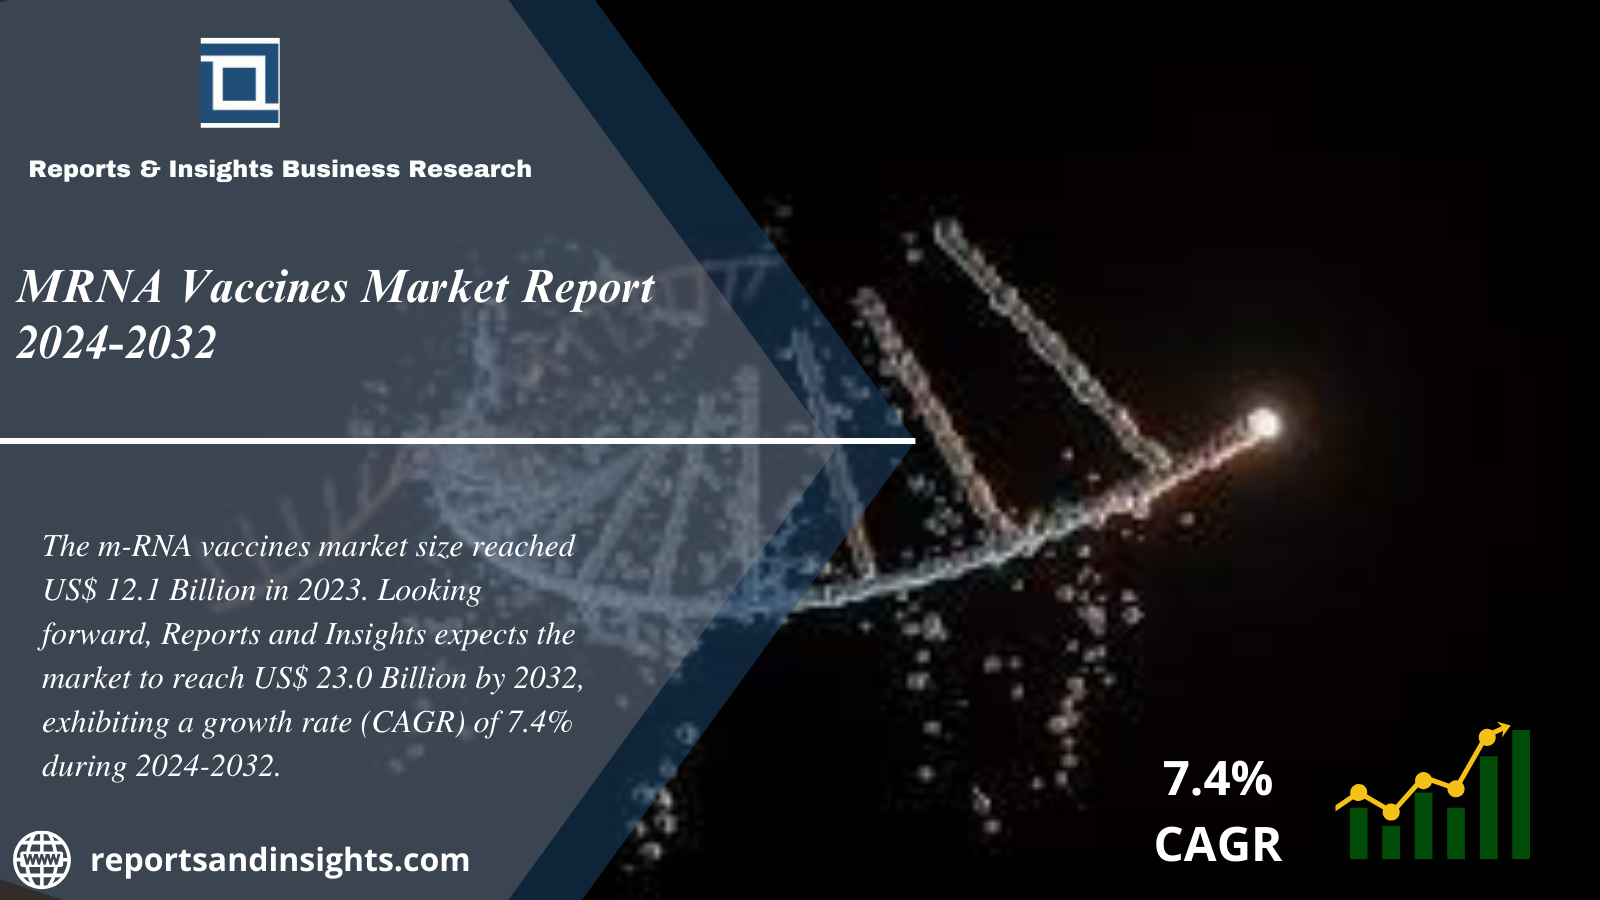 MRNA Vaccines Market 2024 to 2032: Global Size, Trends, Analysis and Research Report